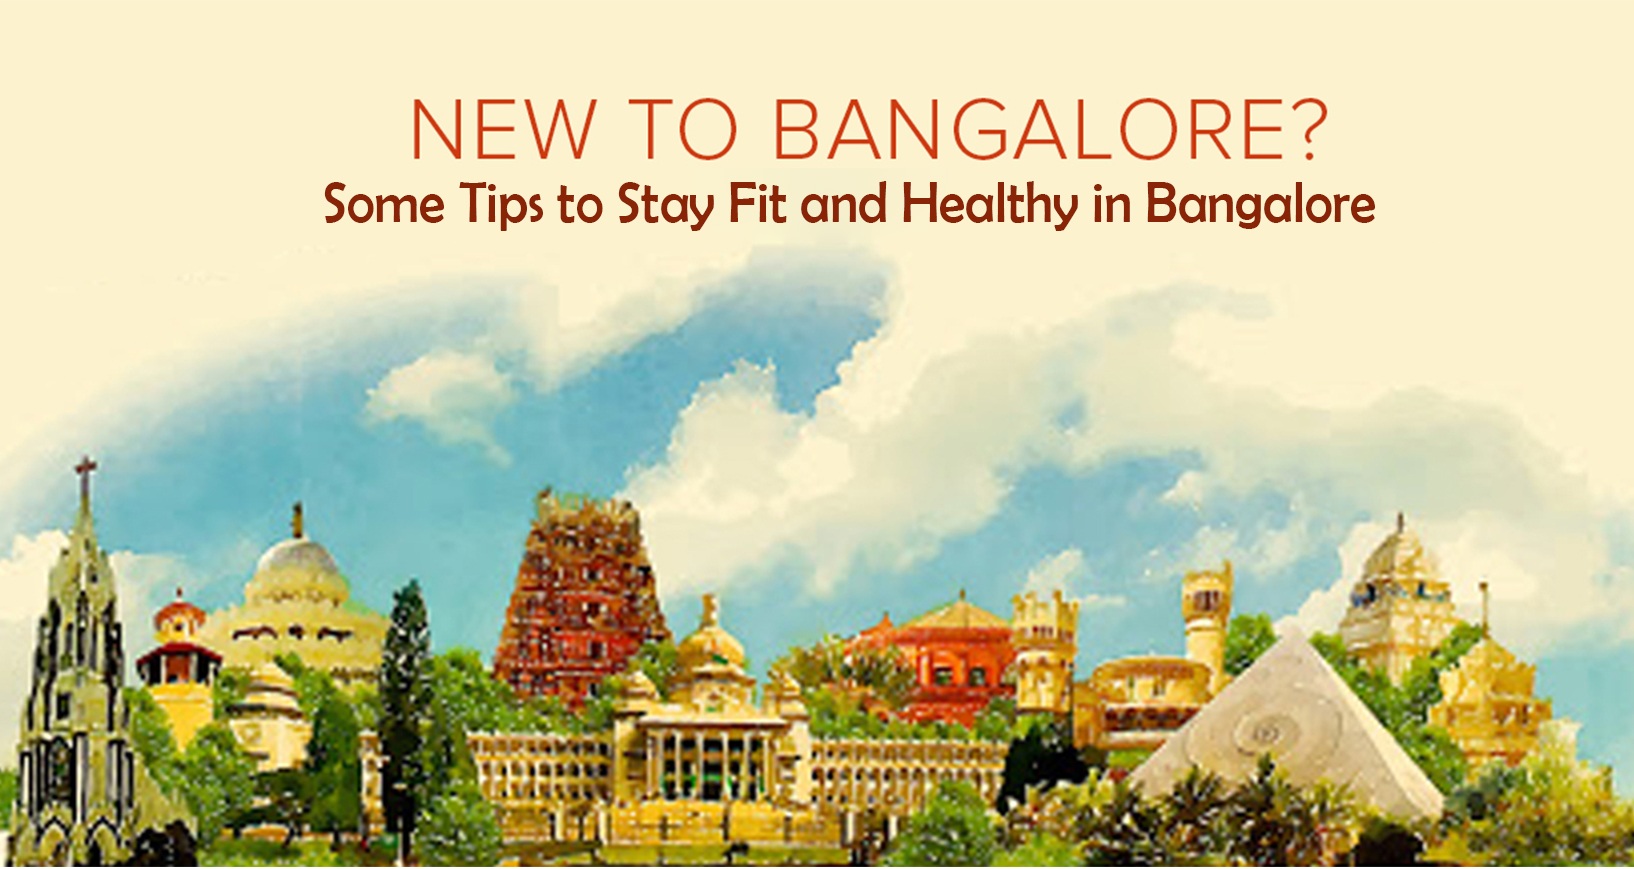 Tips to Stay Fit and Healthy in Bangalore